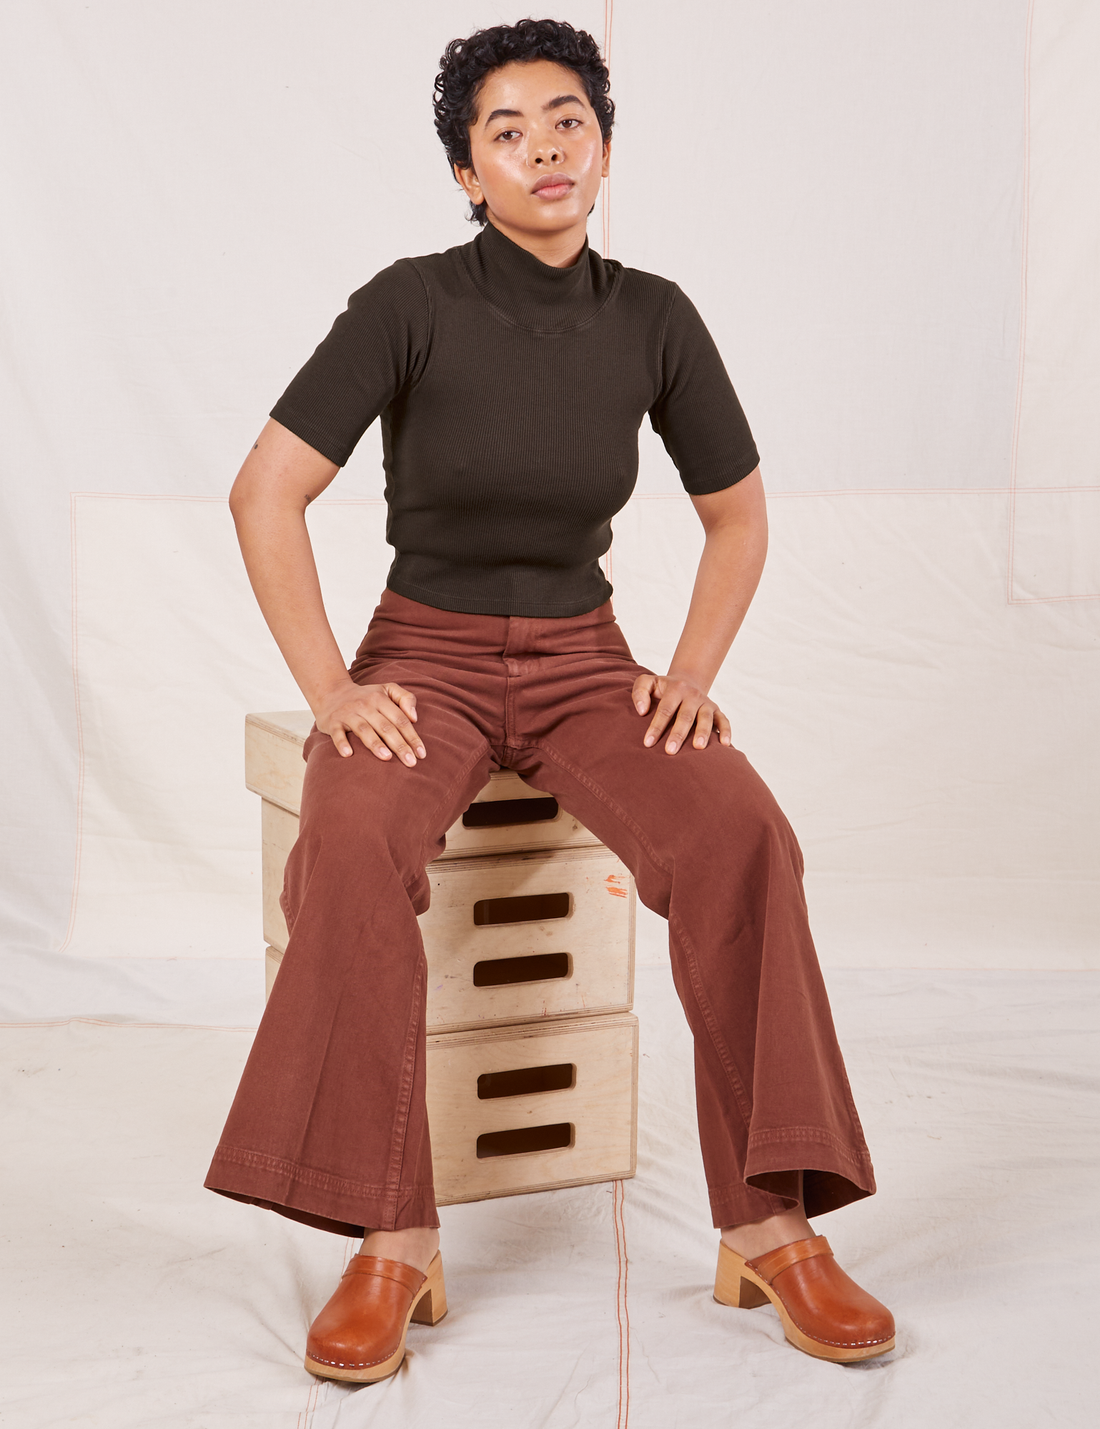 Mika is sitting on a stack of wooden crates wearing 1/2 Sleeve Essential Turtleneck in Espresso Brown and fudgesicle brown Bell Bottoms